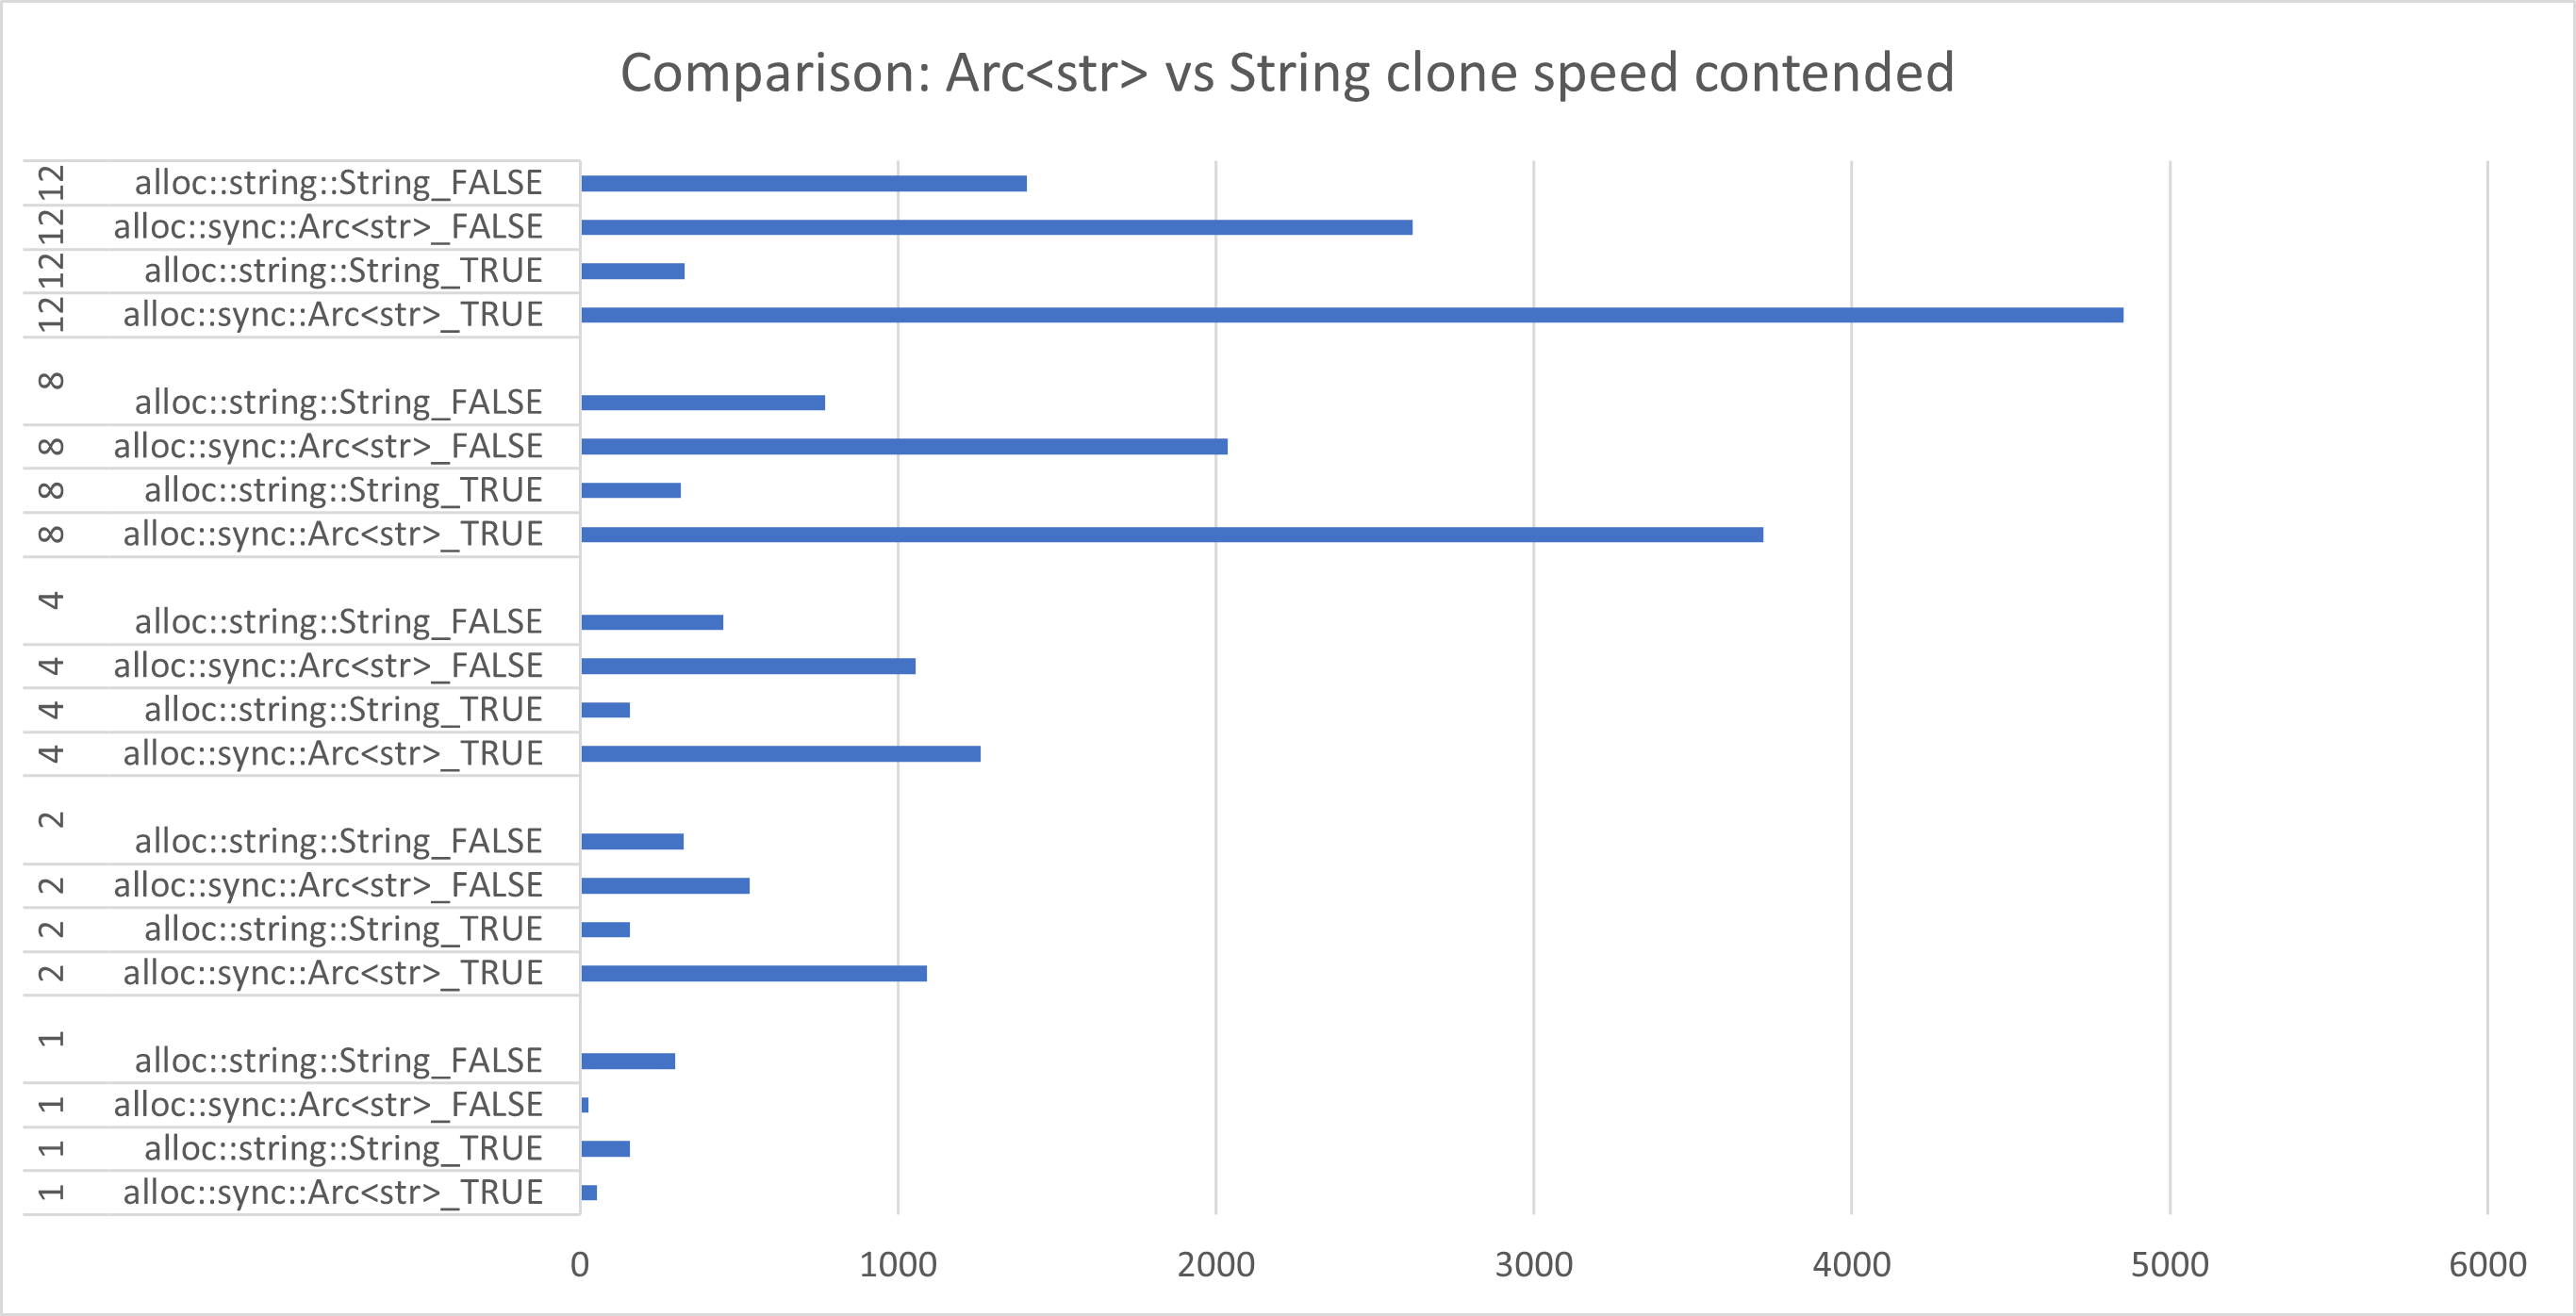 Chart showing performance differences between Arc<str>- and String-cloning